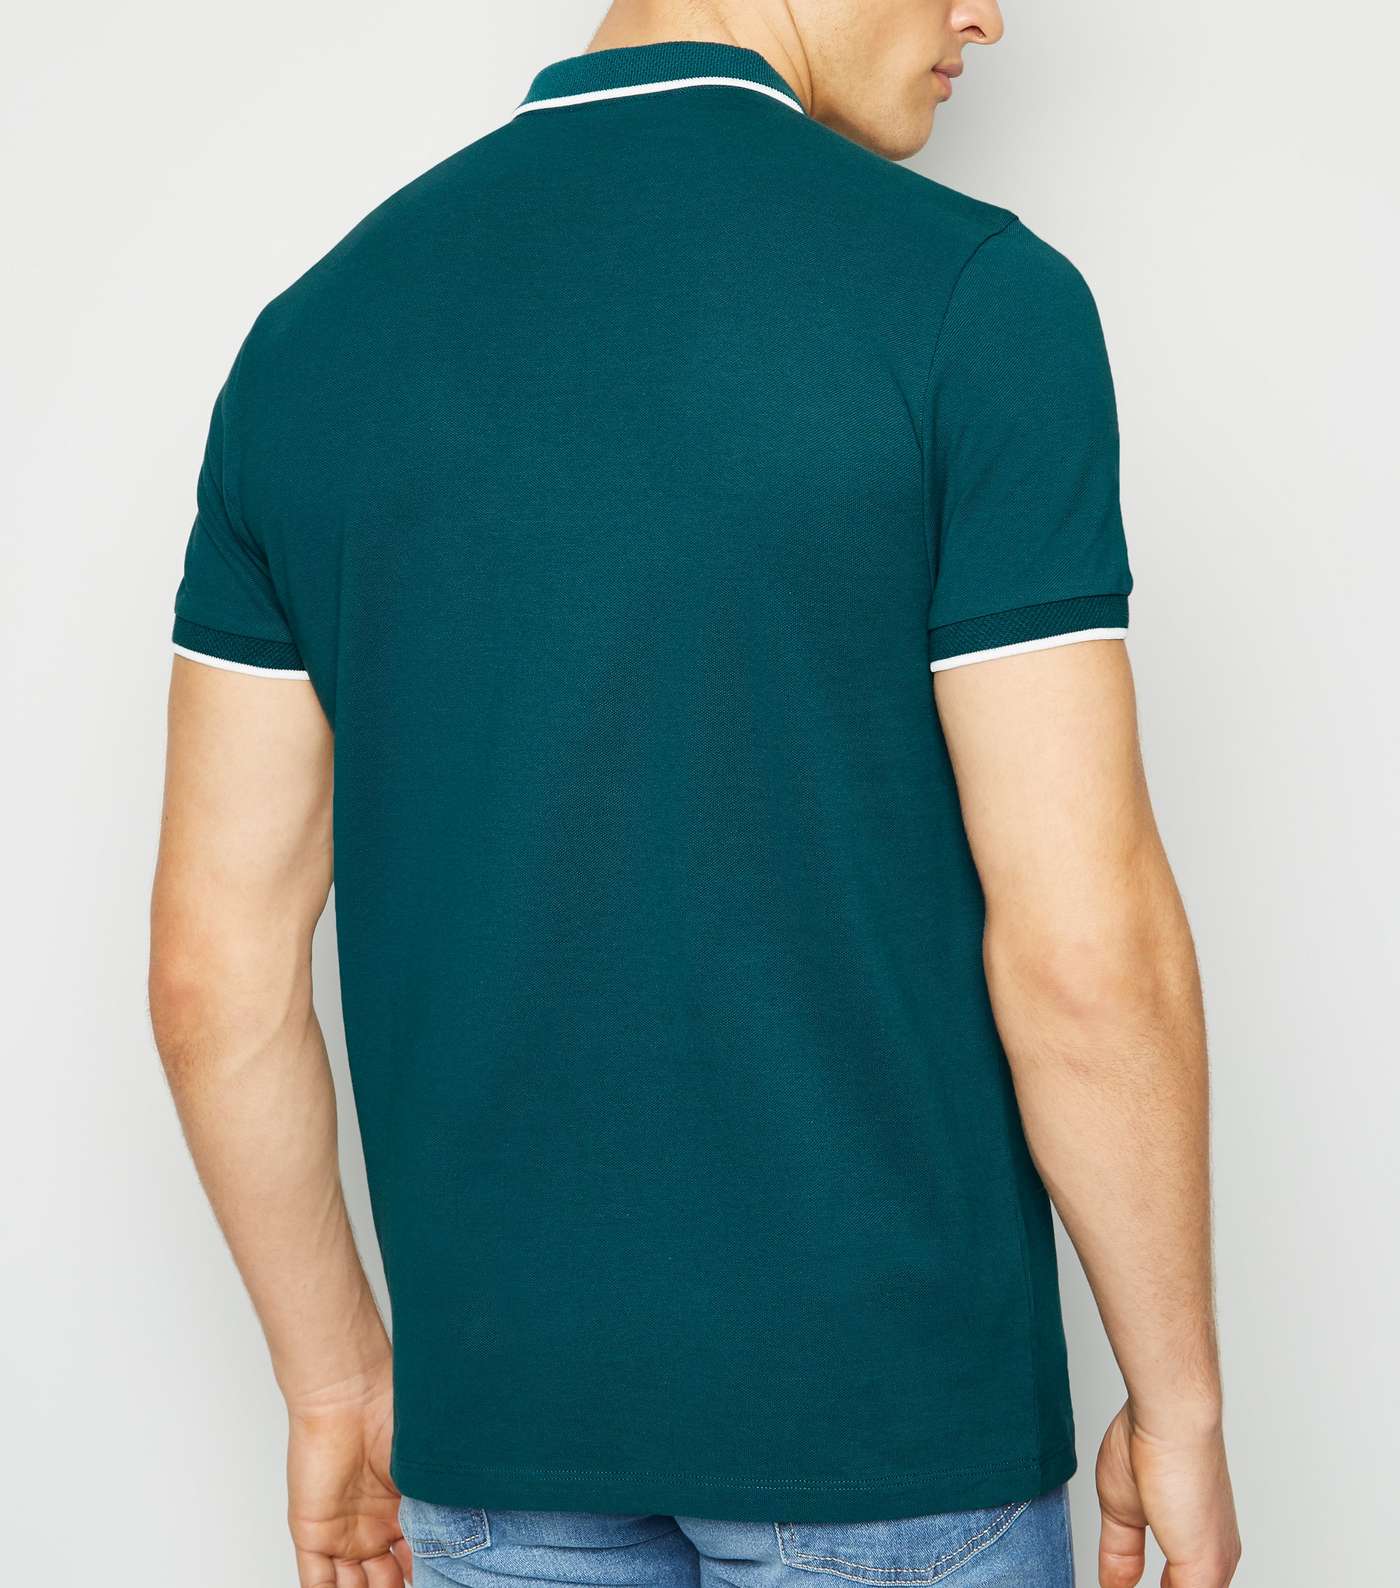 Teal Tipped Zip Front Polo Shirt Image 3